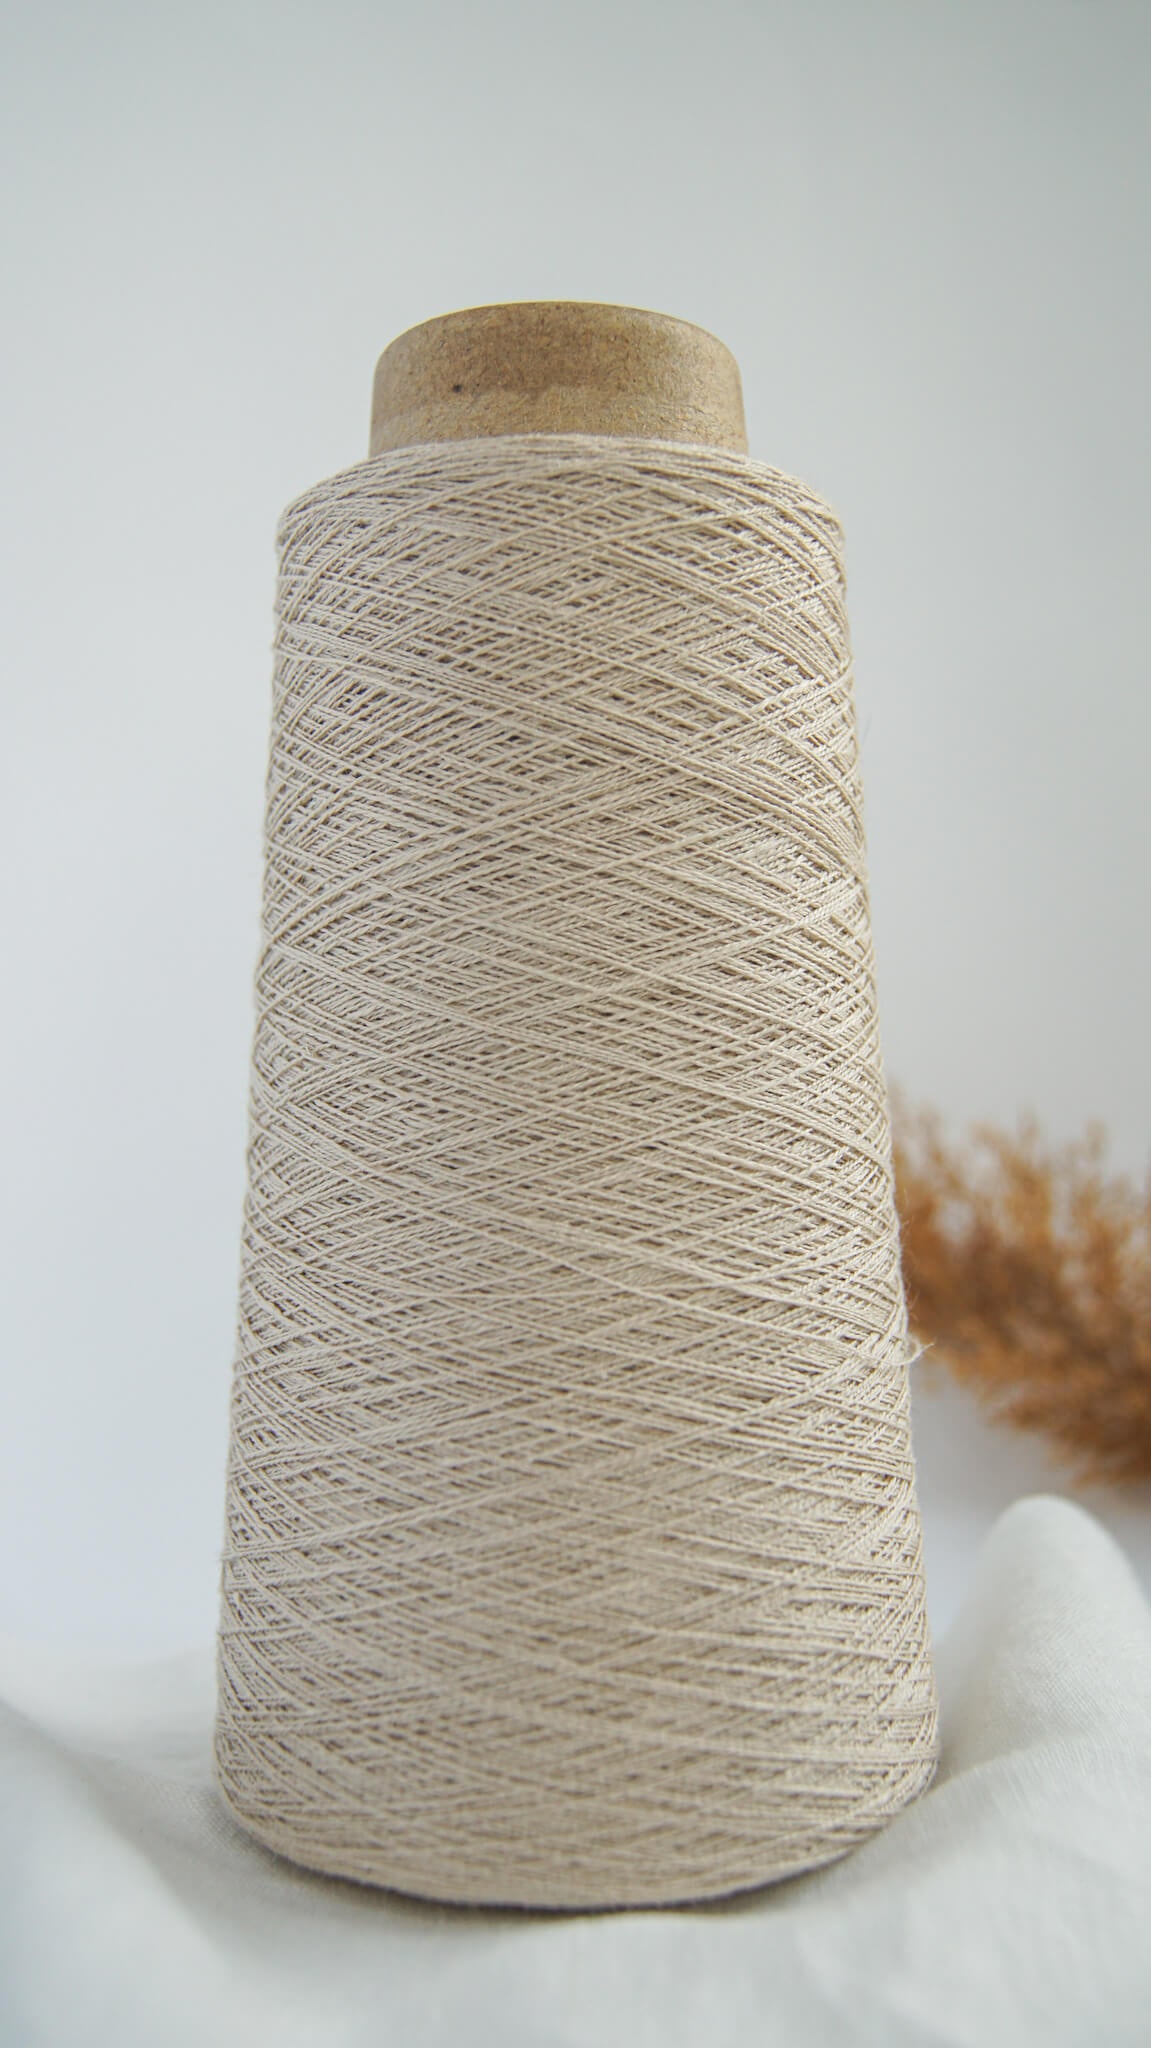 Fil de lin sur cone pour tricot machine et tissage - 2 ply linen yarn on cone for weaving and knitting machine